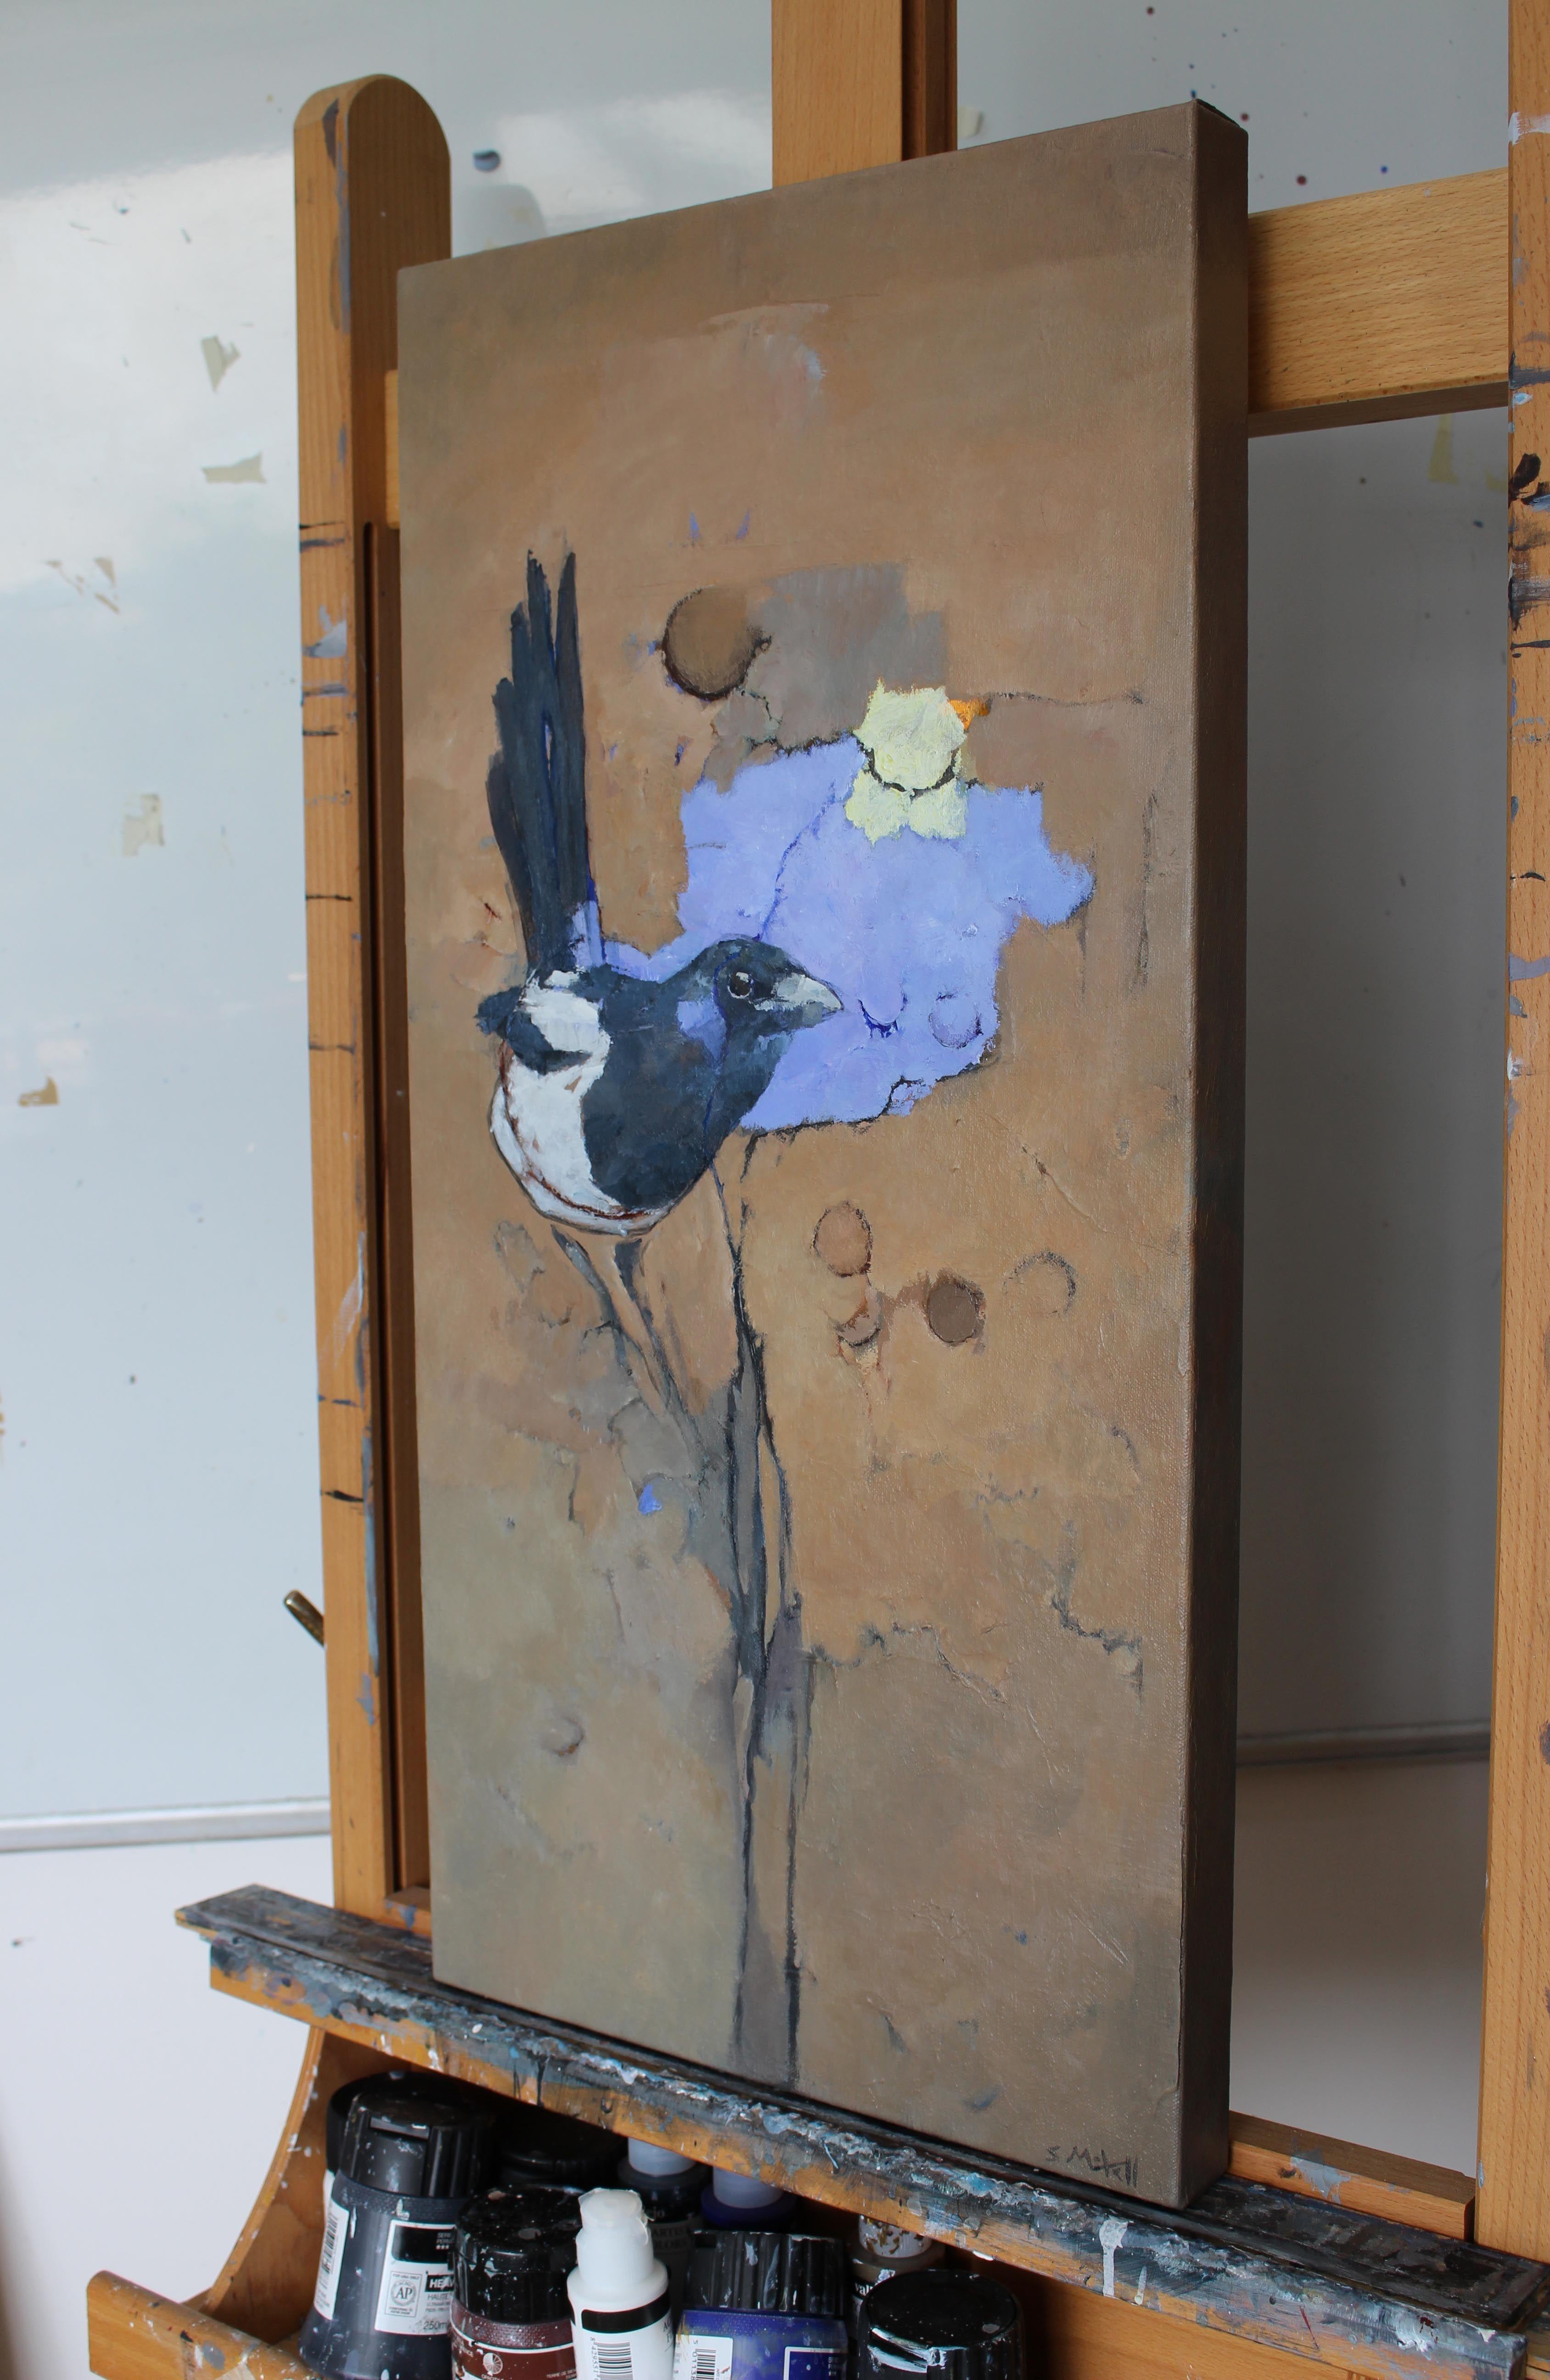 The magpie is such a smart bird, in more ways than one. I was interested in how it symbolised different, often opposite meanings in folklore around the world. It is painted on deep profile canvas, with the sides painted brown to match the painting.